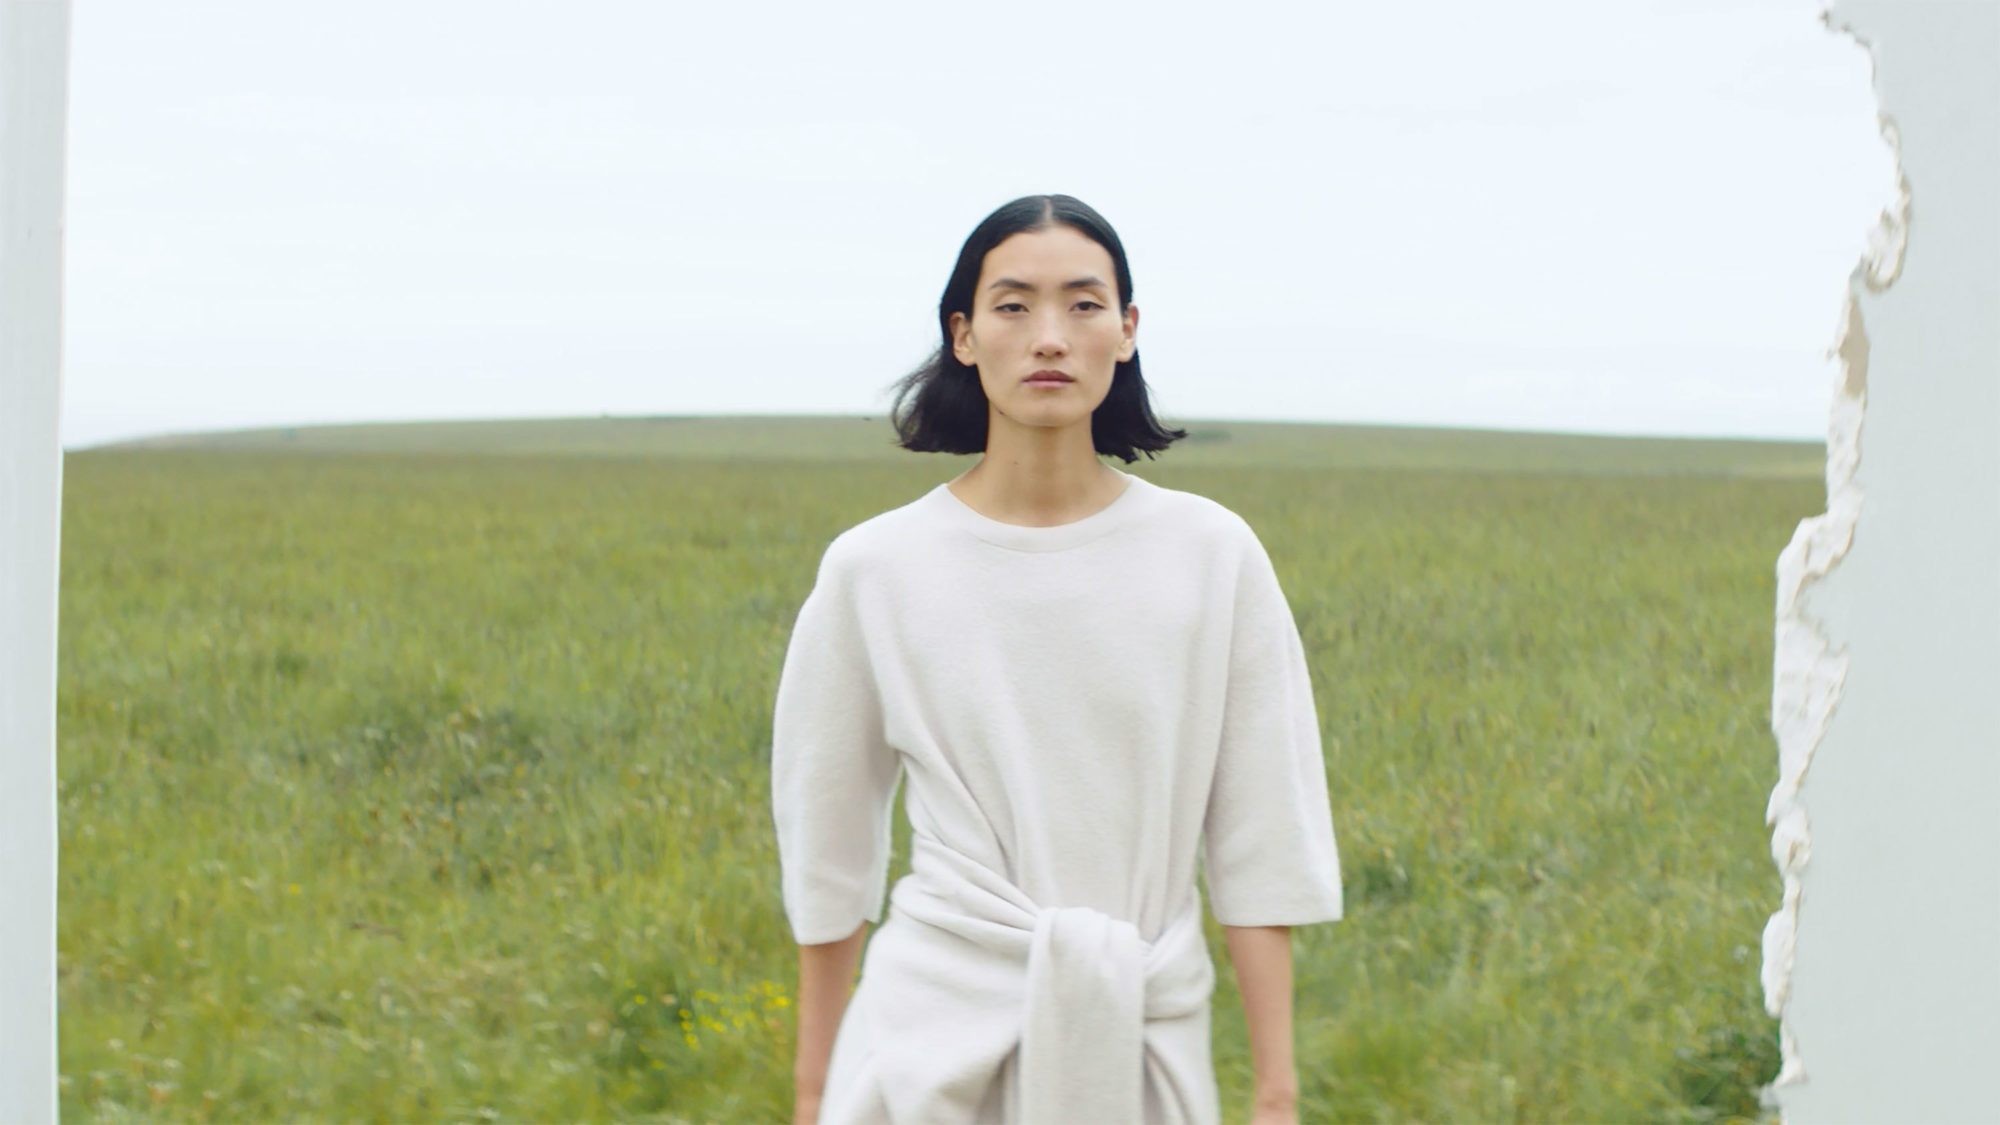 Chinese consumers are interested in all things natural and environmentally responsible, and this has created new momentum across fashion, beauty and hospitality sectors in China. Photo: The Luxury Conversation